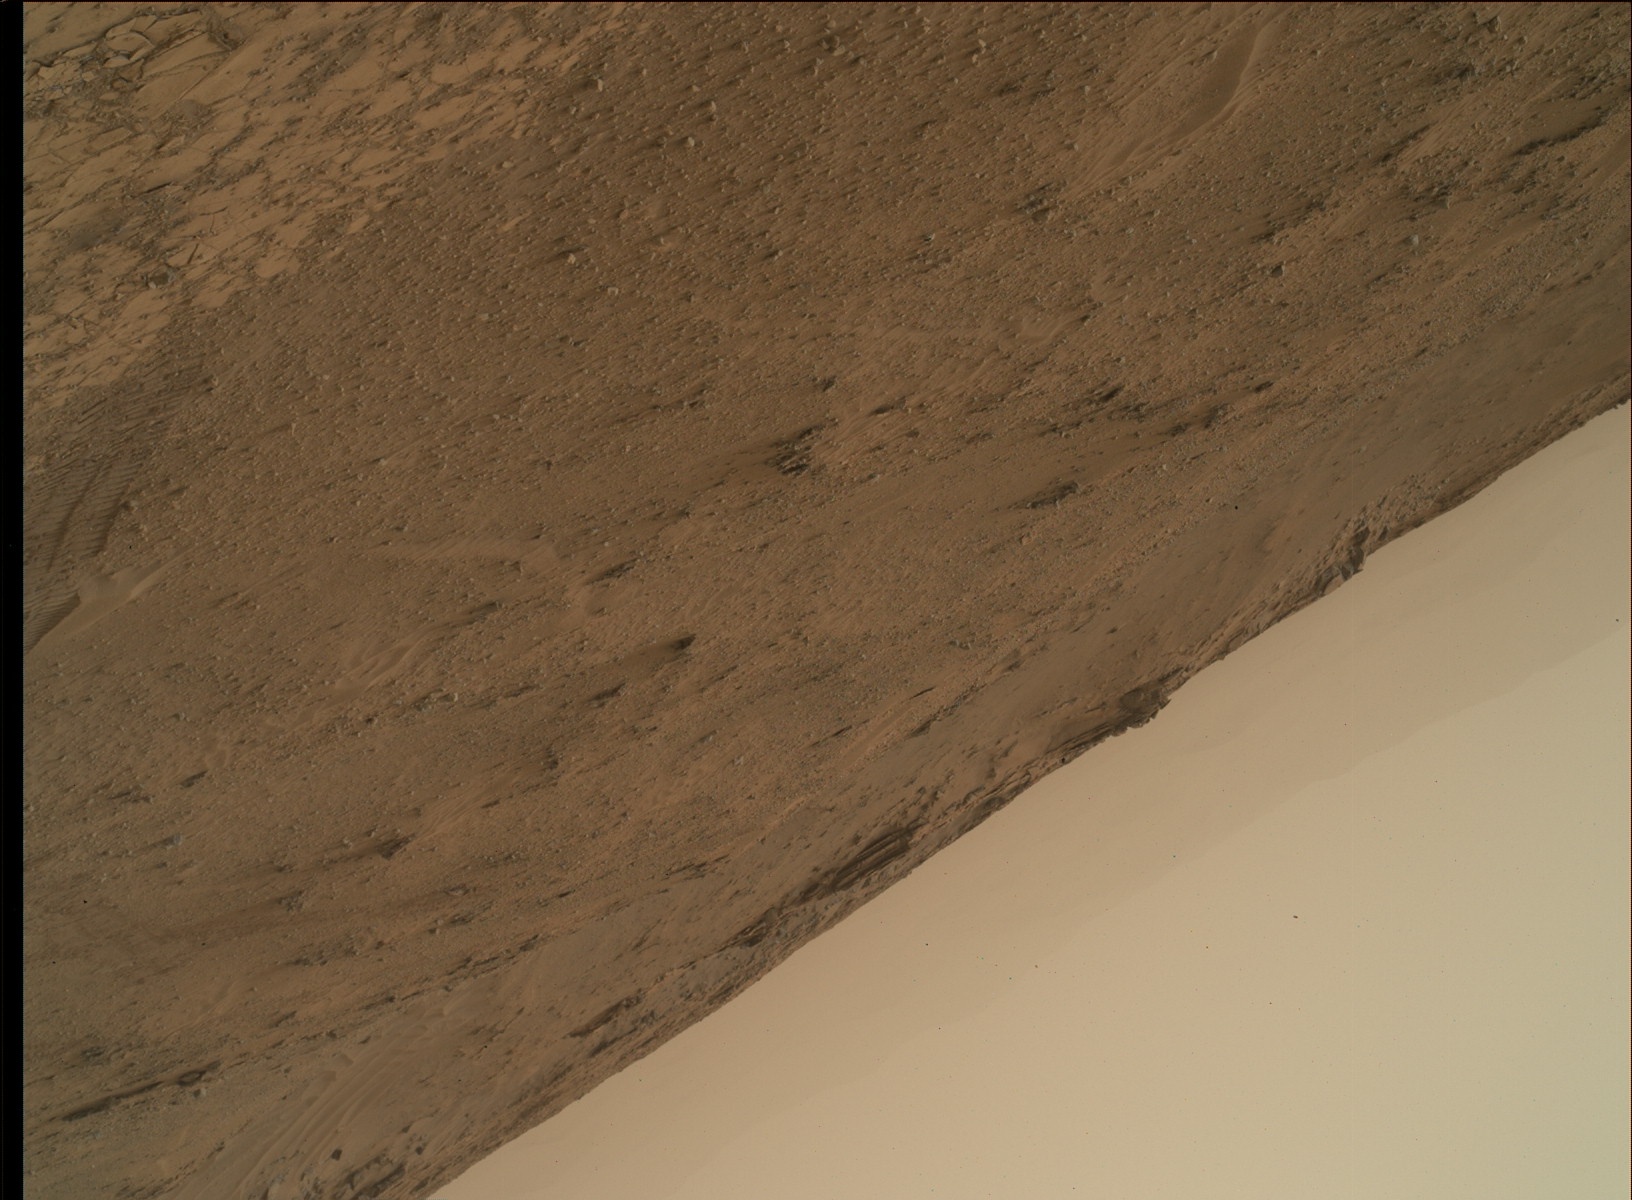 Nasa's Mars rover Curiosity acquired this image using its Mars Hand Lens Imager (MAHLI) on Sol 807